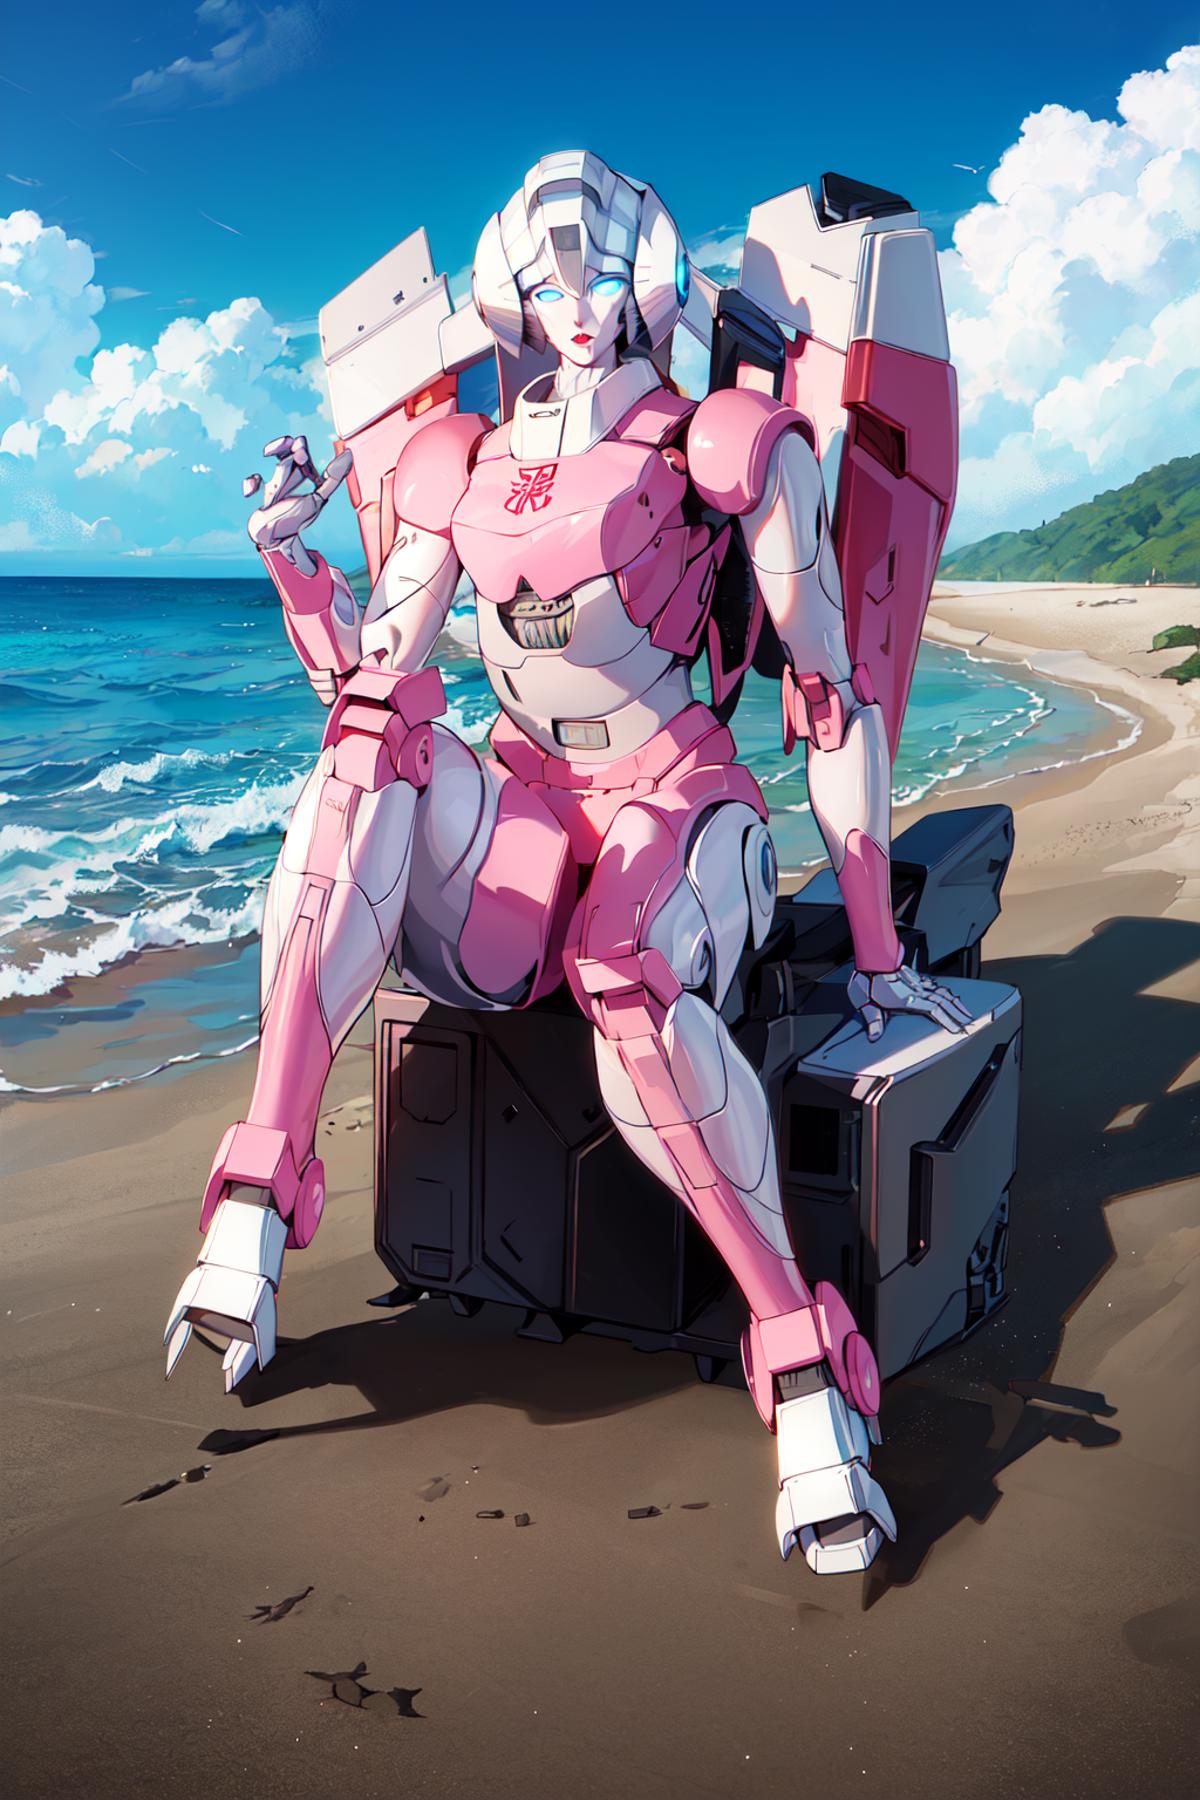 Arcee (G1) - Transformers image by SoundWave009